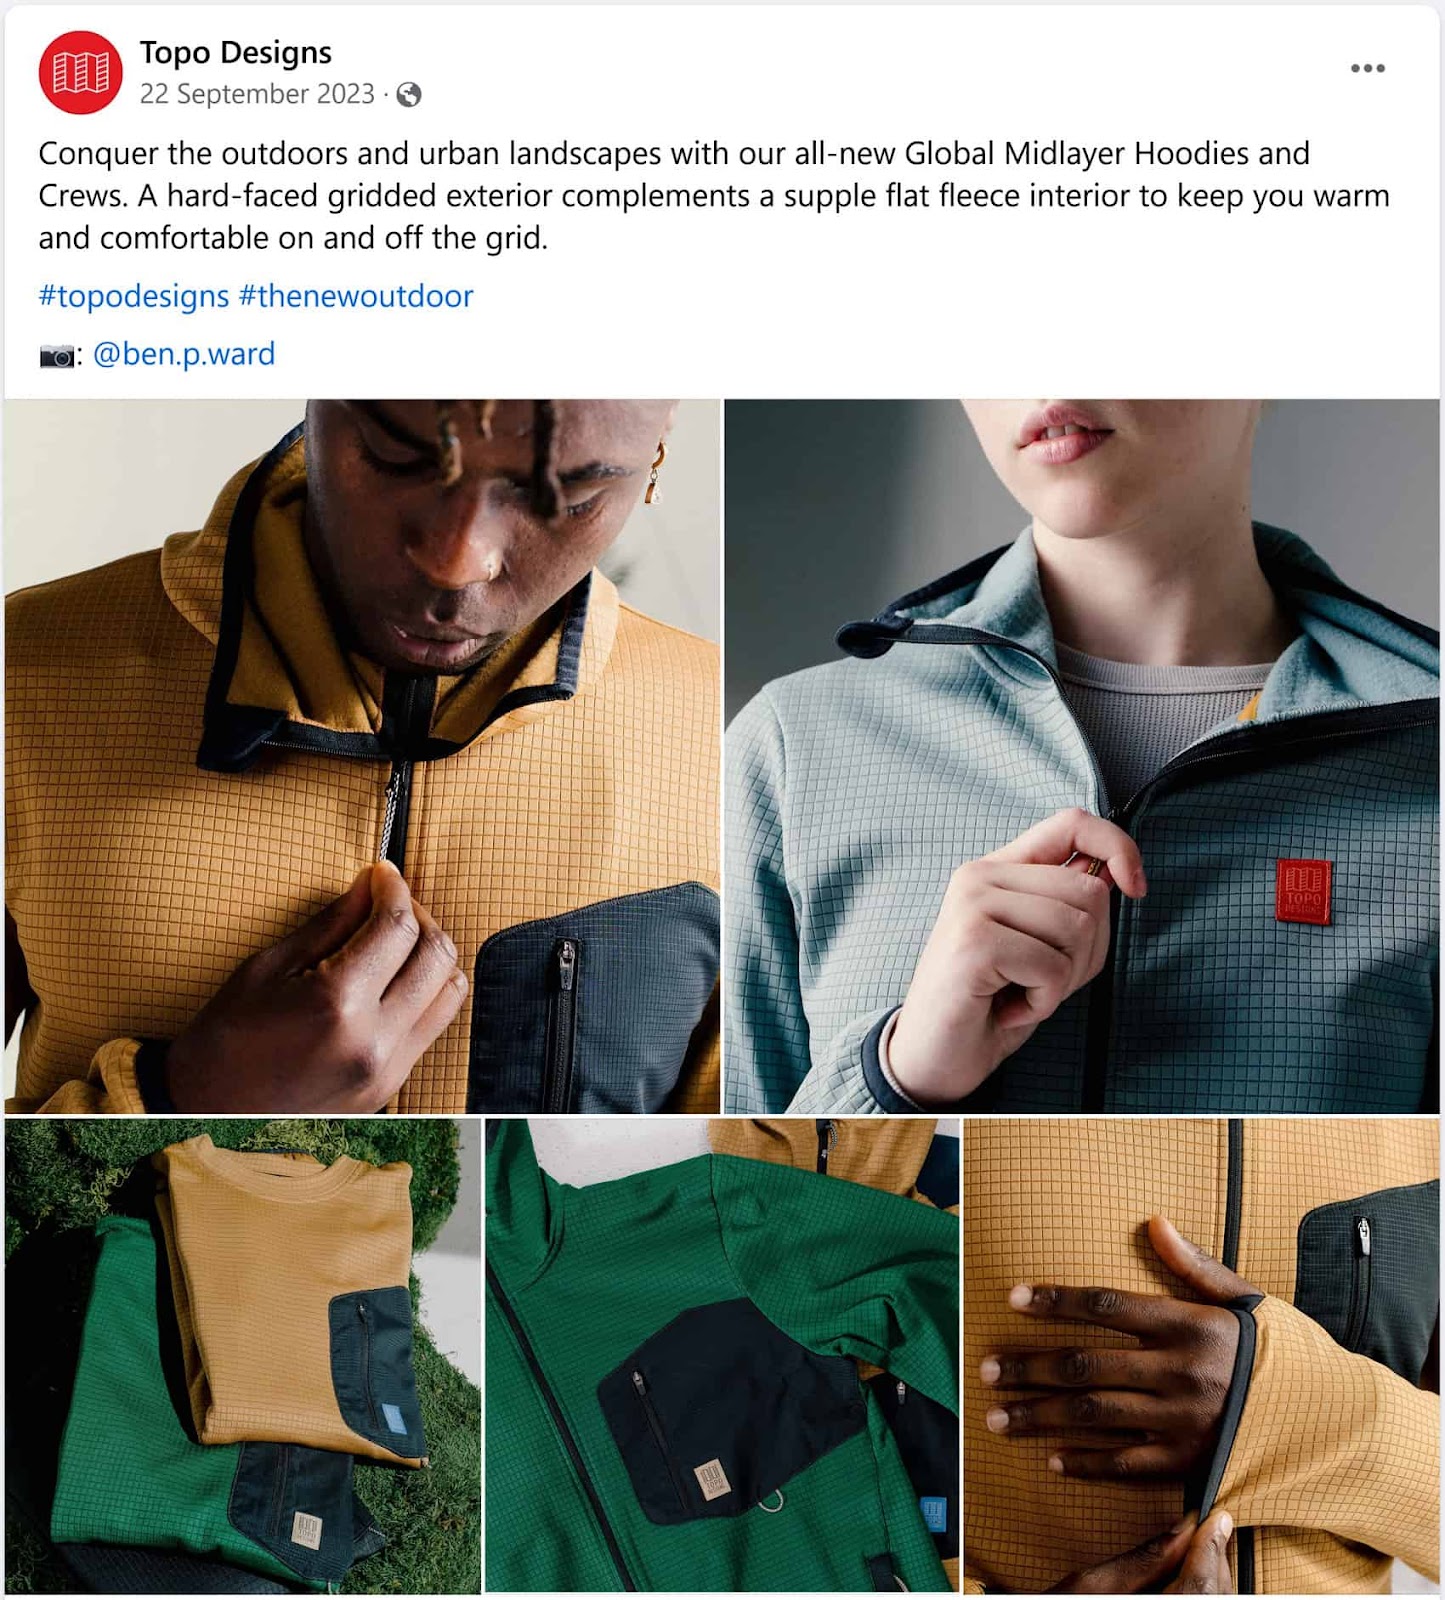 Topo Designs' station  connected  Facebook sharing a caller   merchandise  line